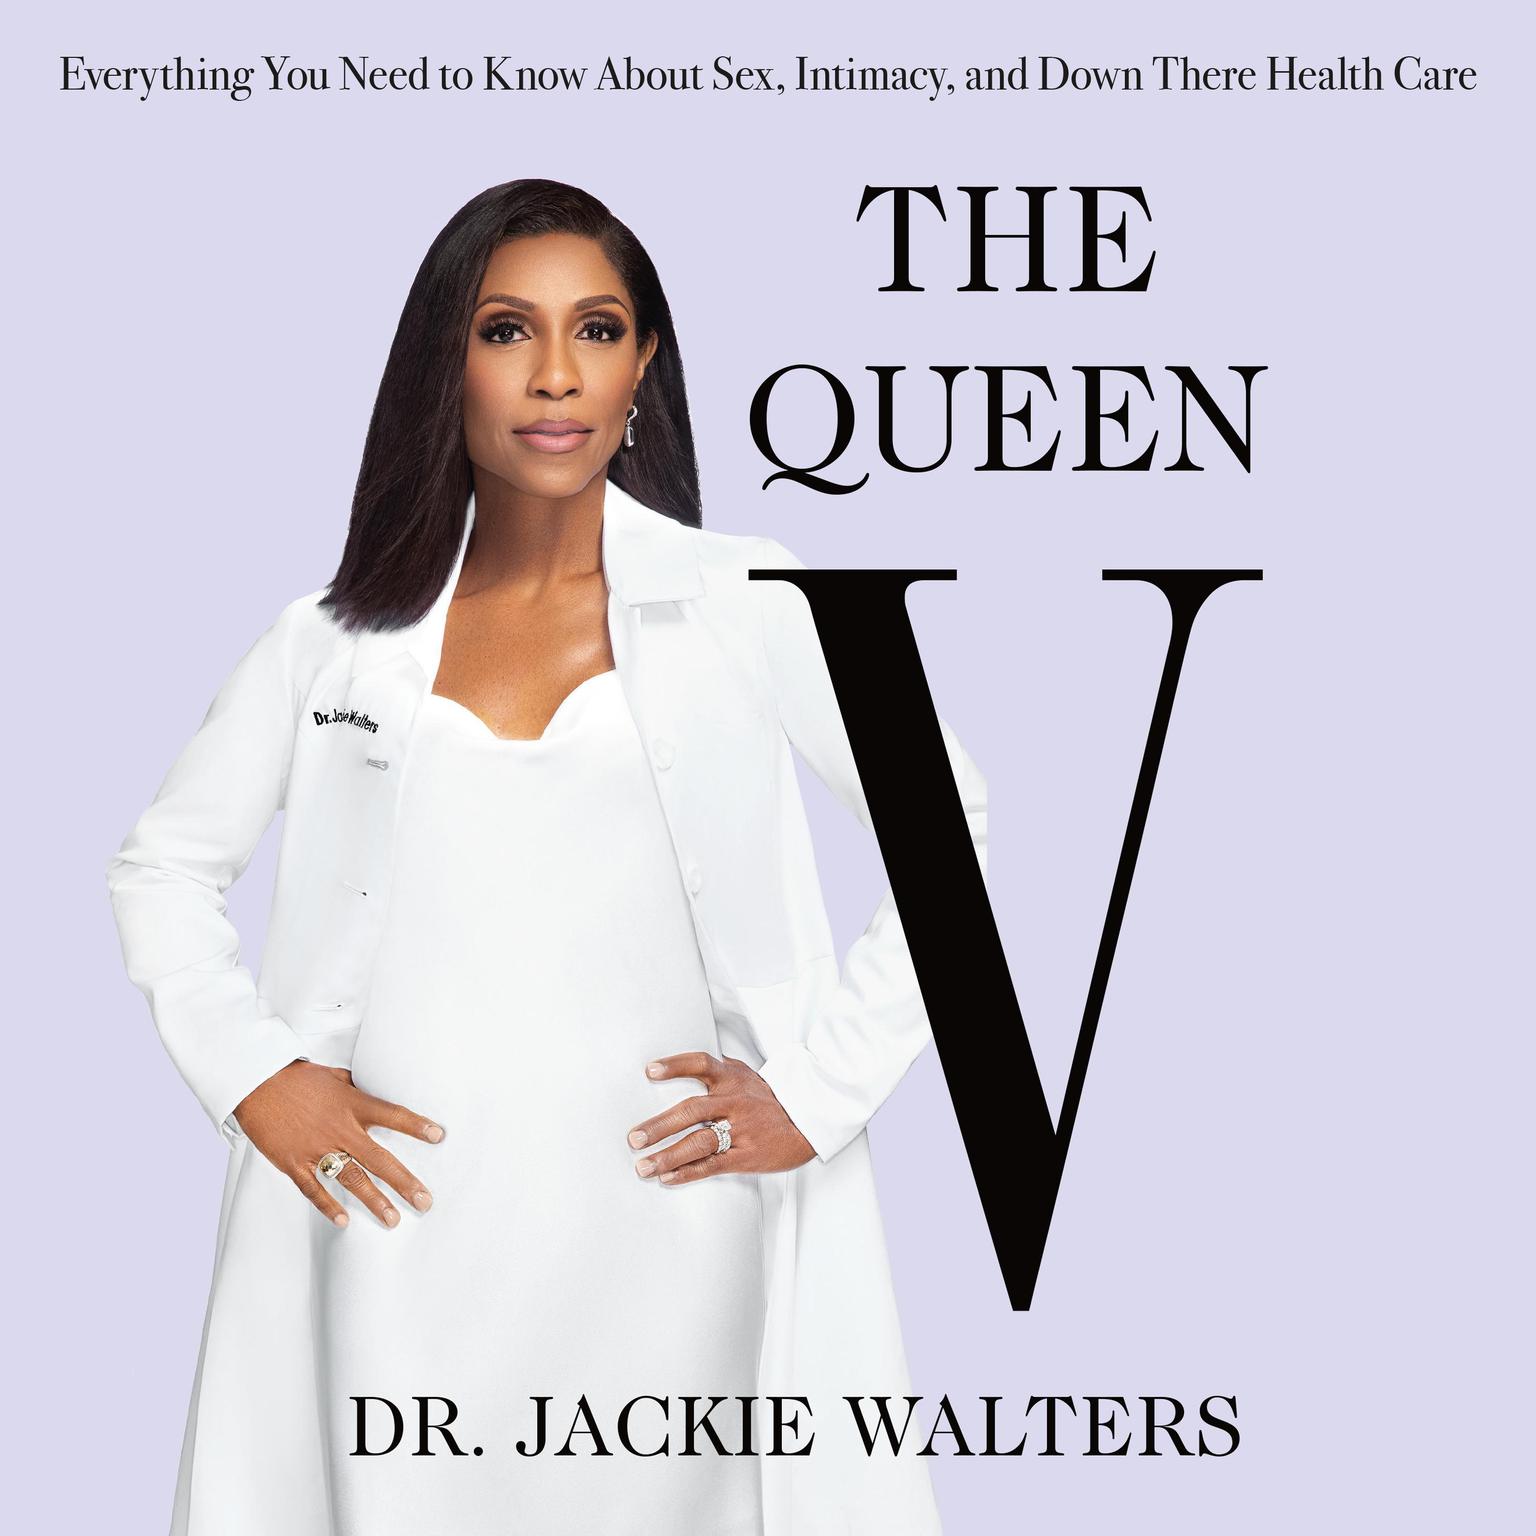 The Queen V: Everything You Need to Know About Sex, Intimacy, and Down There Health Care Audiobook, by Jackie Walters